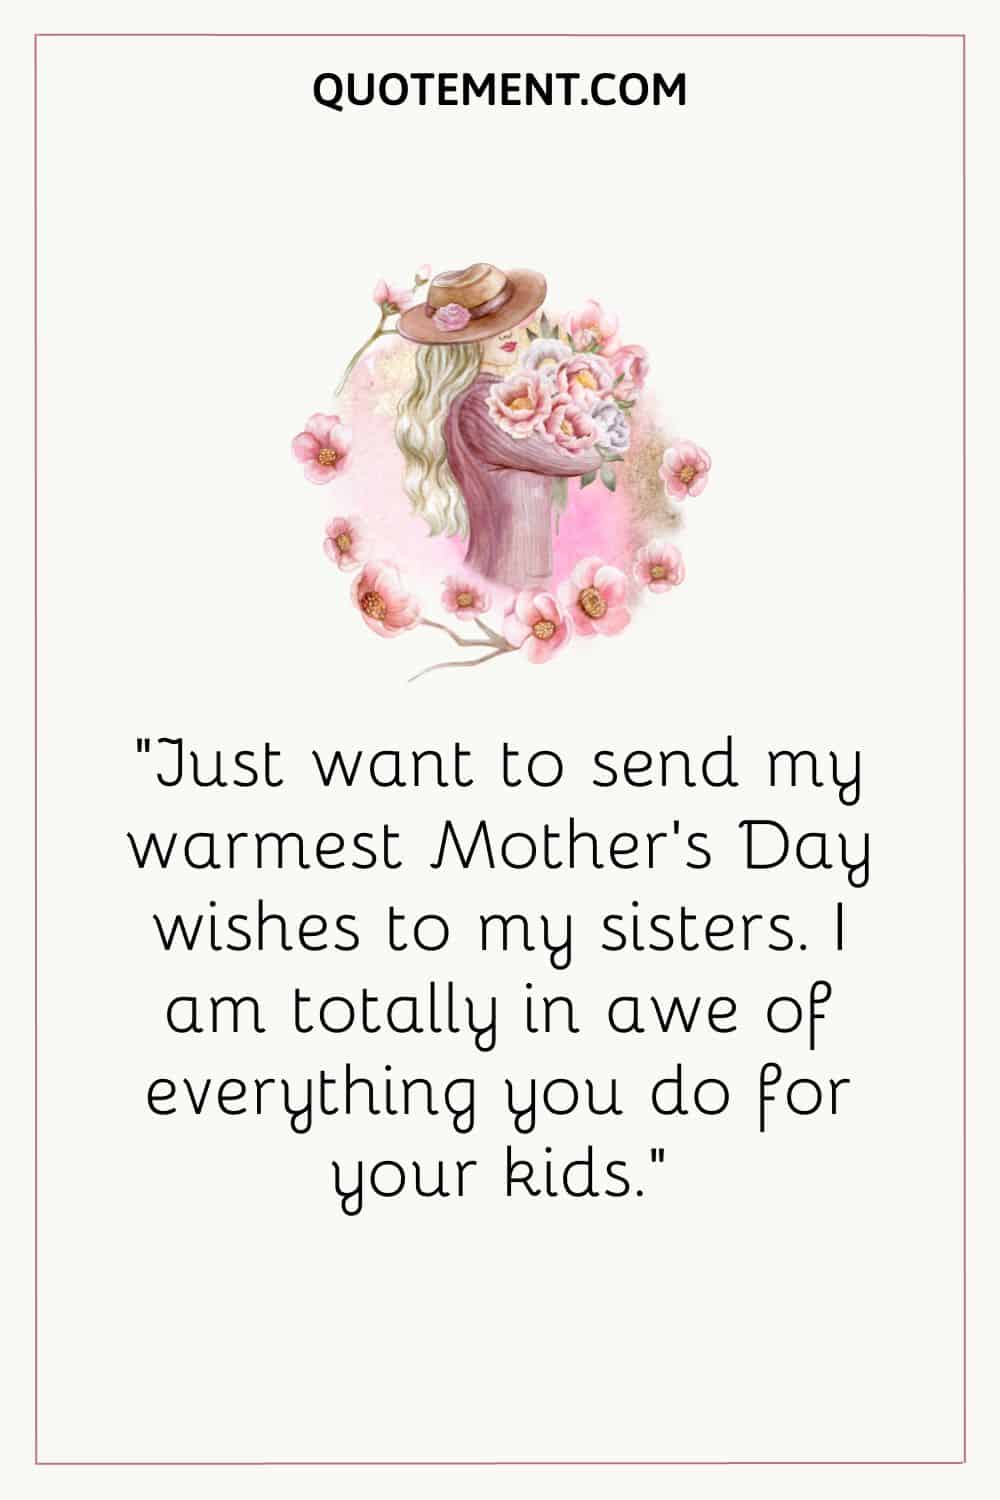 Just want to send my warmest Mother’s Day wishes to my sisters